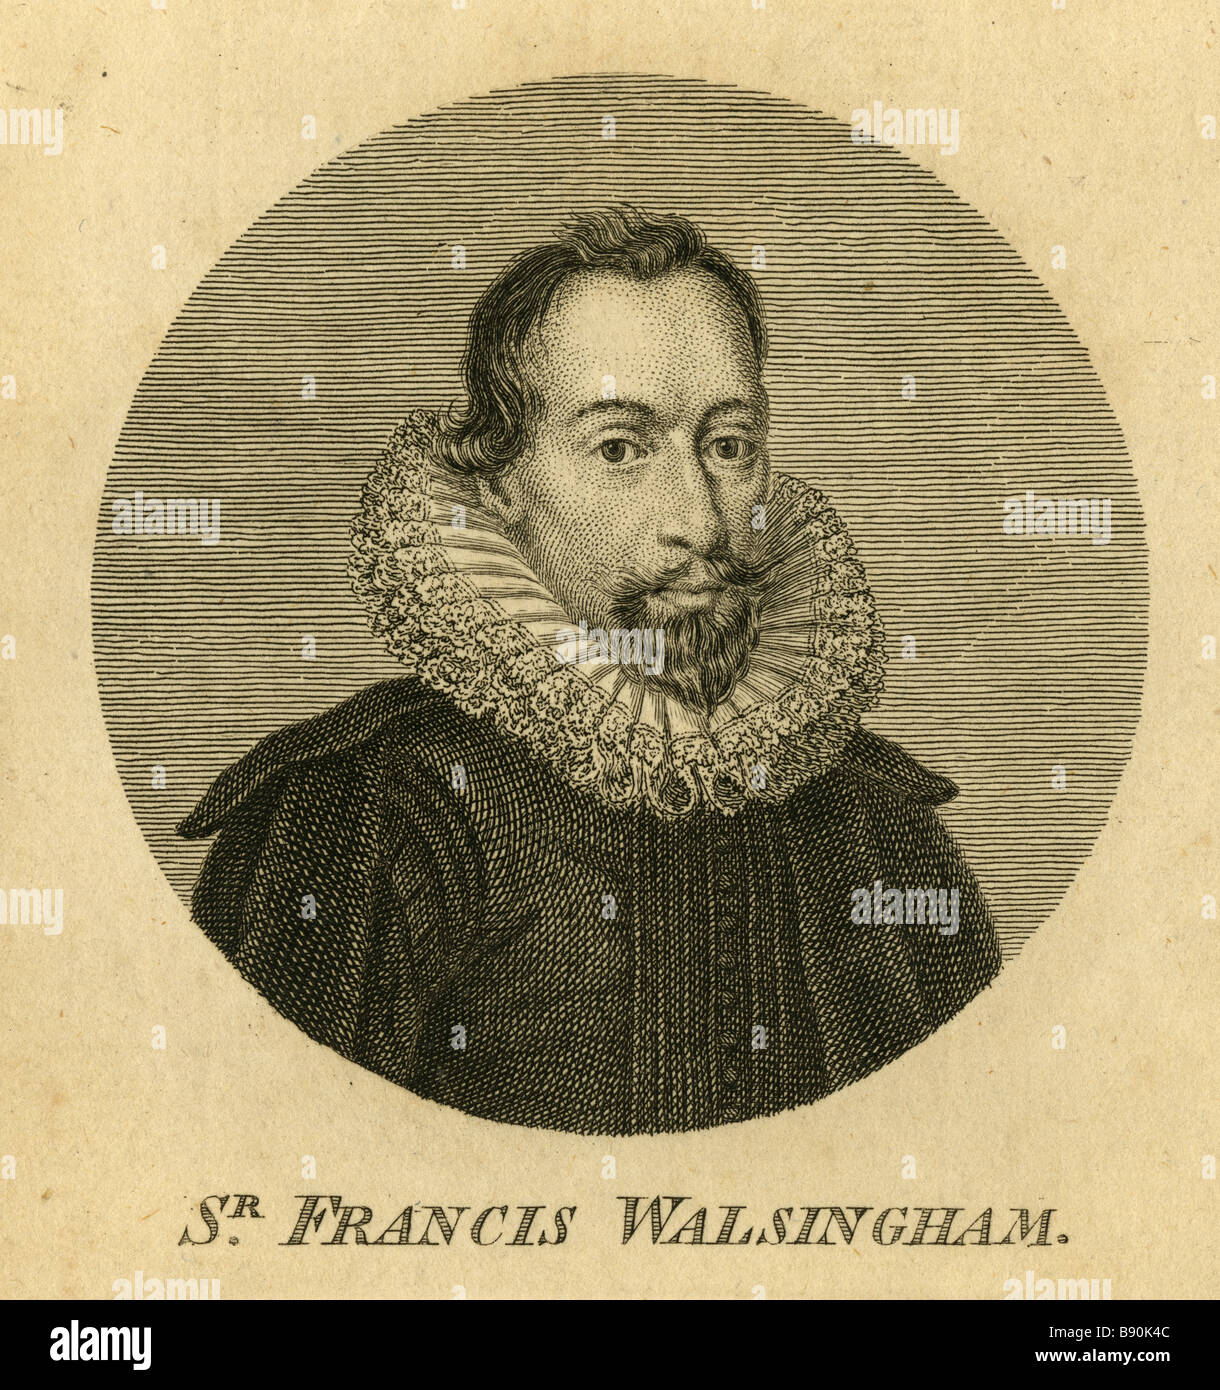 Antique c1820 engraving of Sir Francis Walsingham. Sir Francis Walsingham (1532-1590) was principal secretary to Queen Elizabeth I of England. Stock Photo